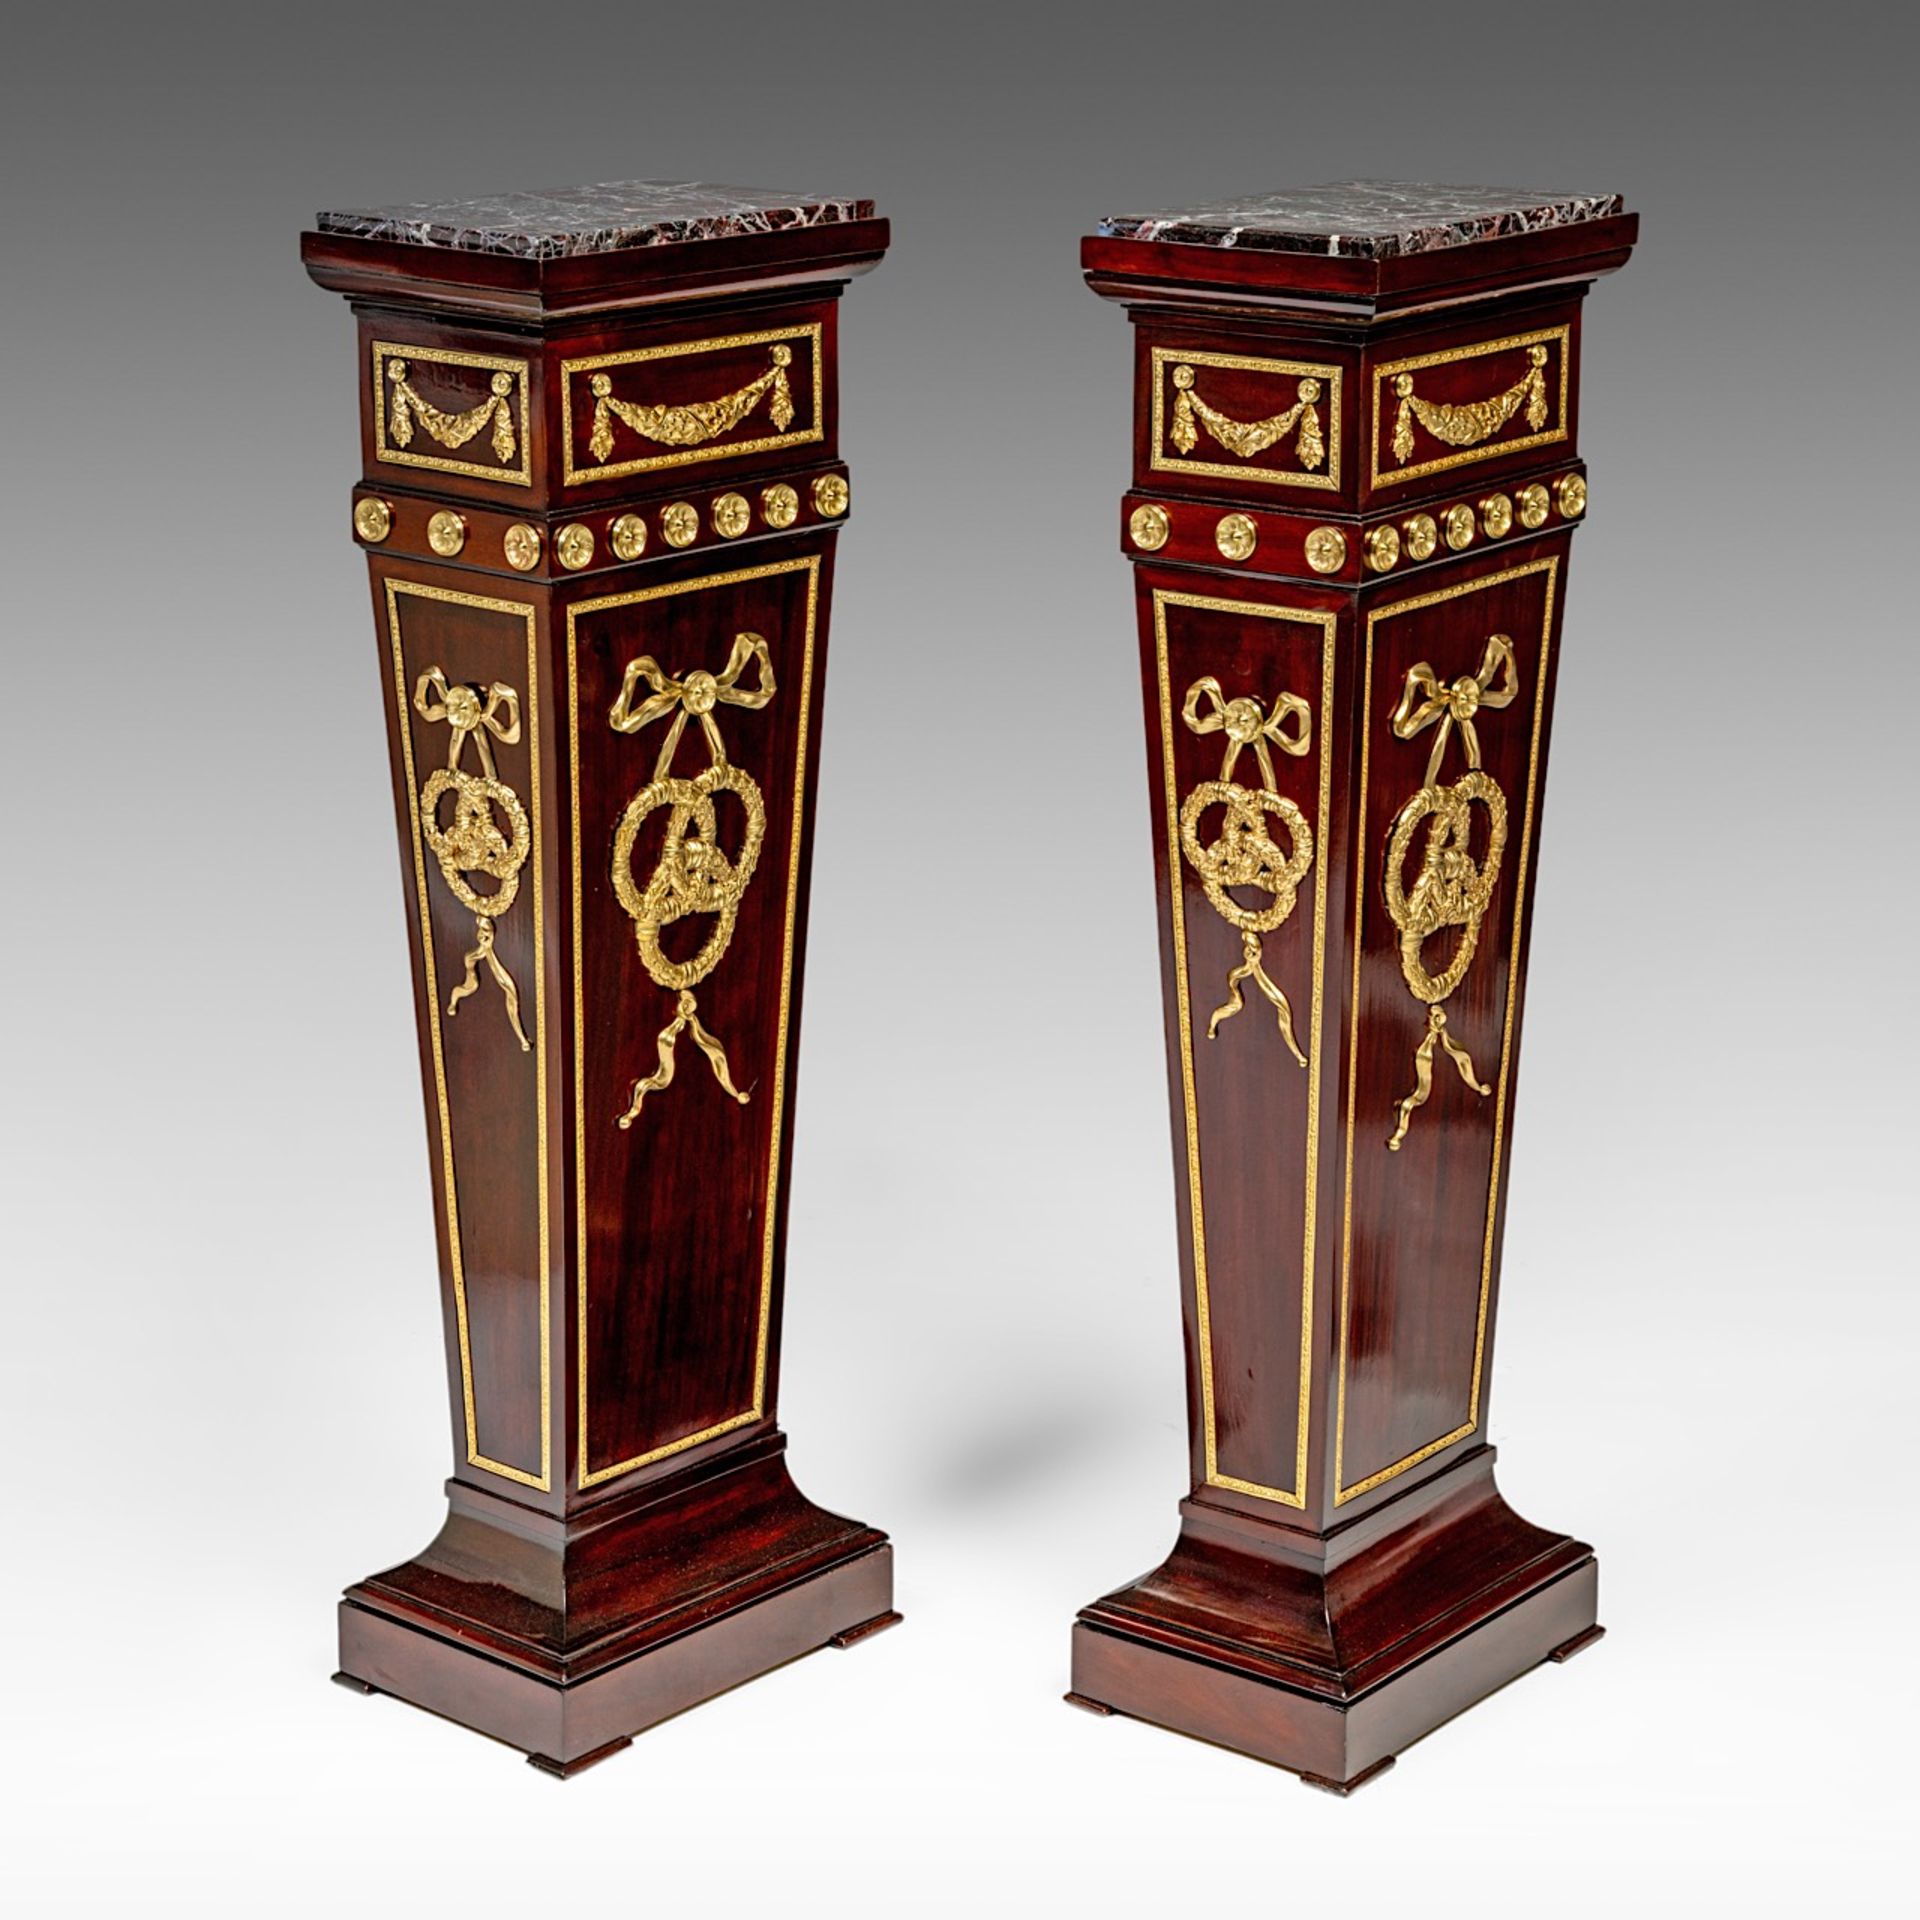 A pair of Louis XVI-style columns with marble tops and gilt bronze mounts, H 122 cm - W 38,5 cm - D